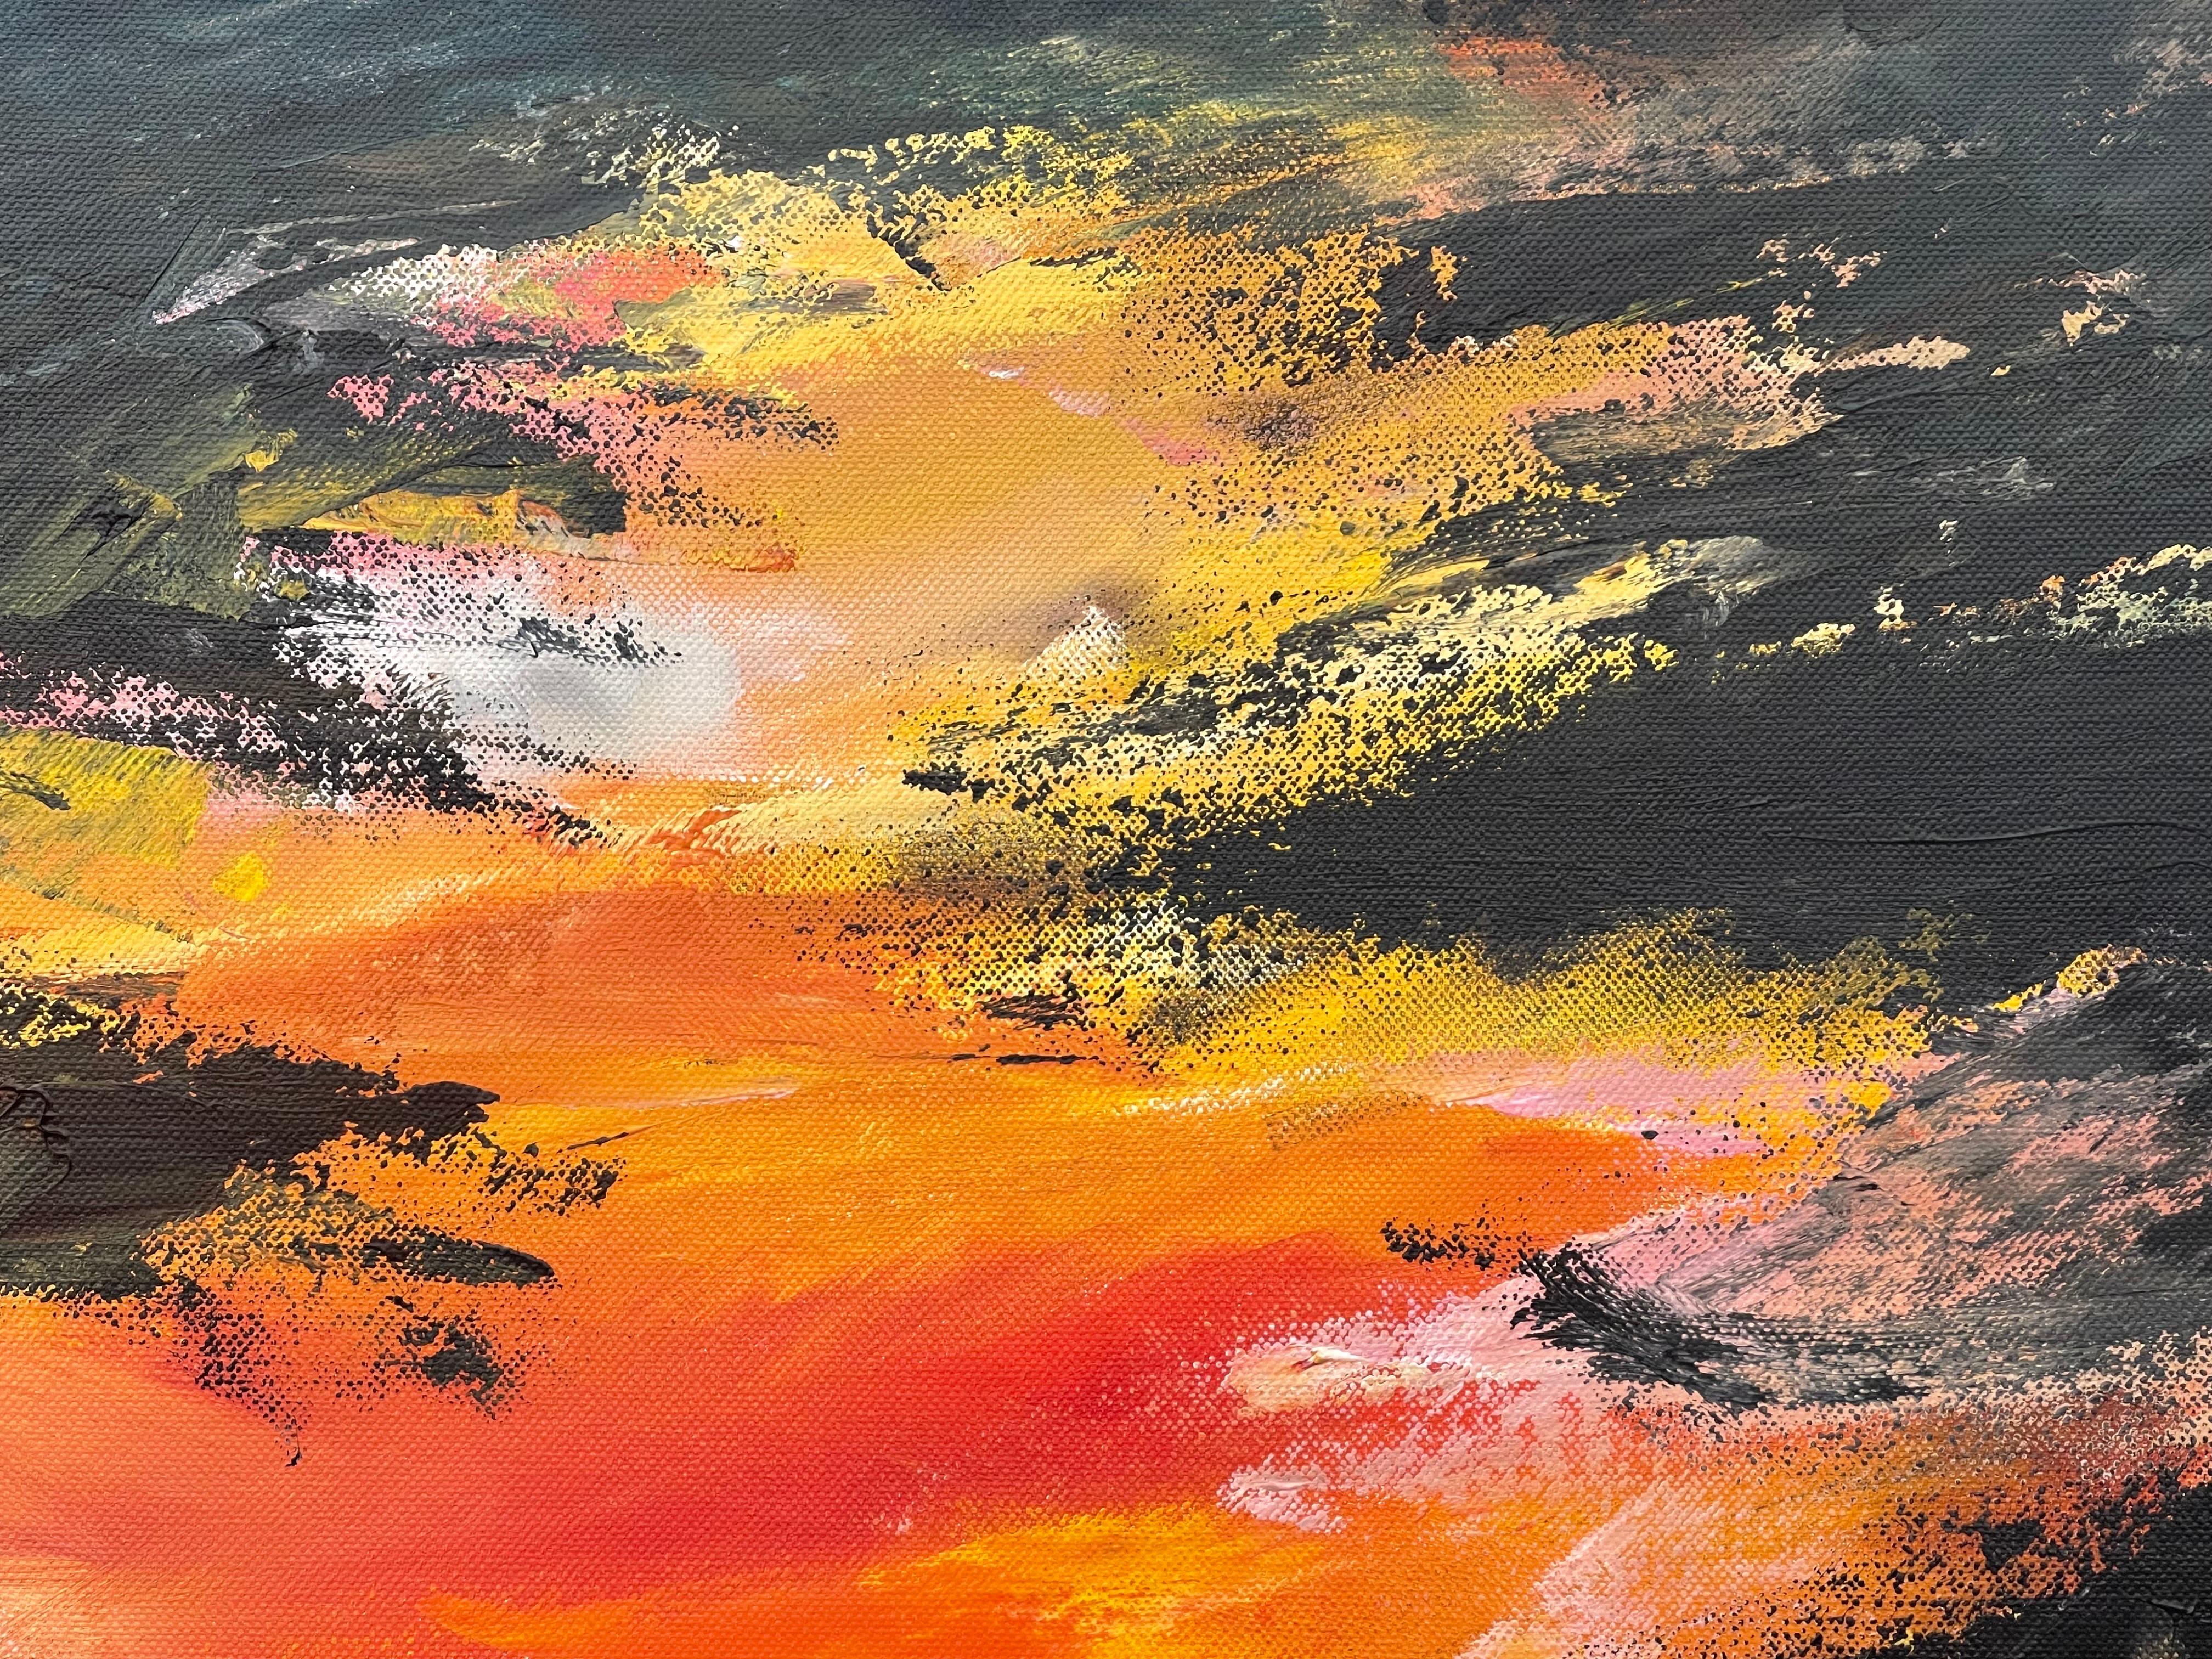 Black Orange & Yellow Abstract Landscape Painting by Contemporary British Artist For Sale 11